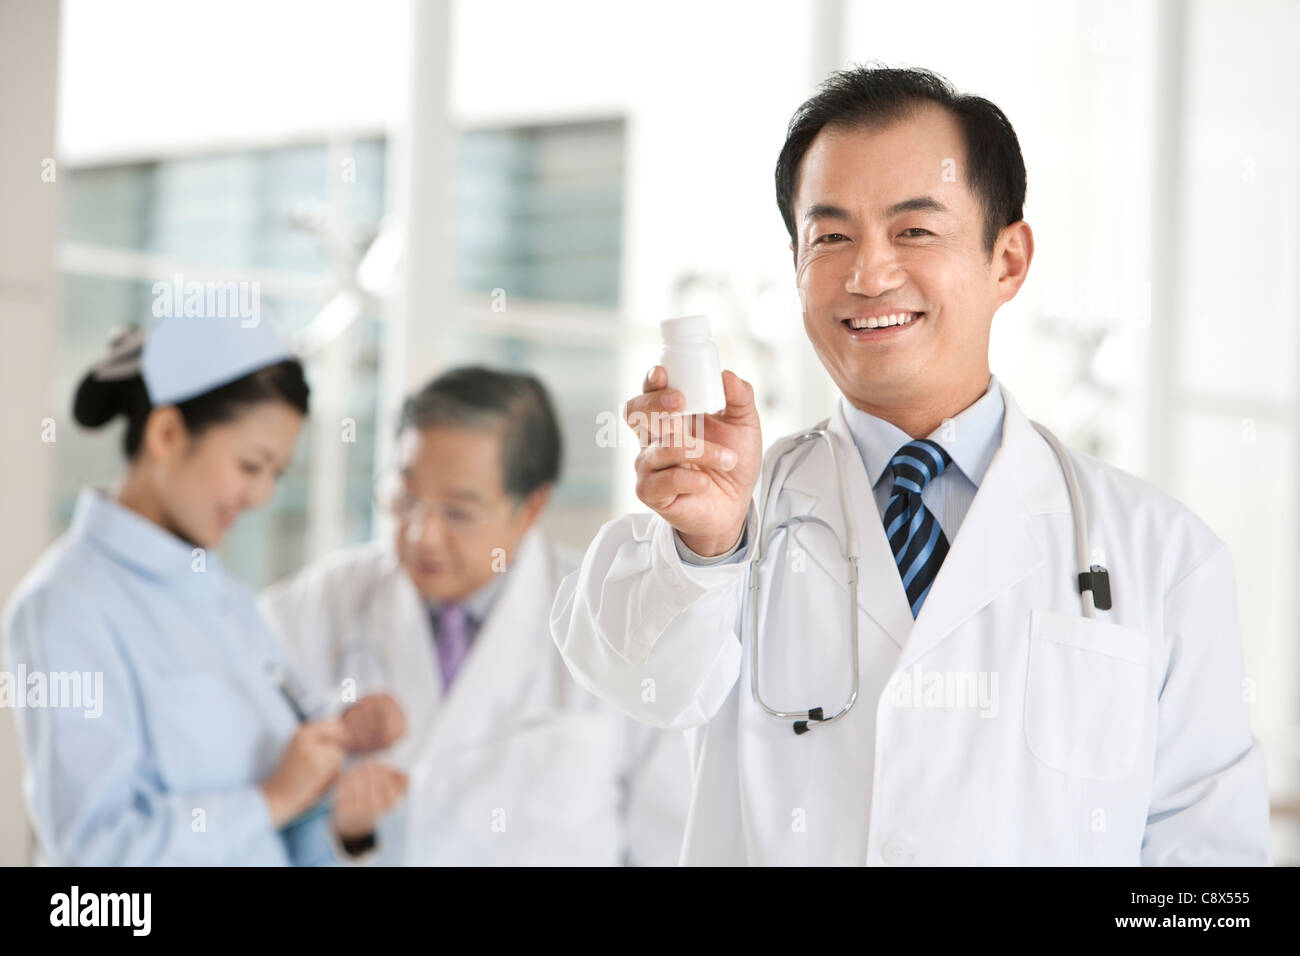 Doctor Offers Perscription Medicine, Doctor and Nurse in Background Stock Photo